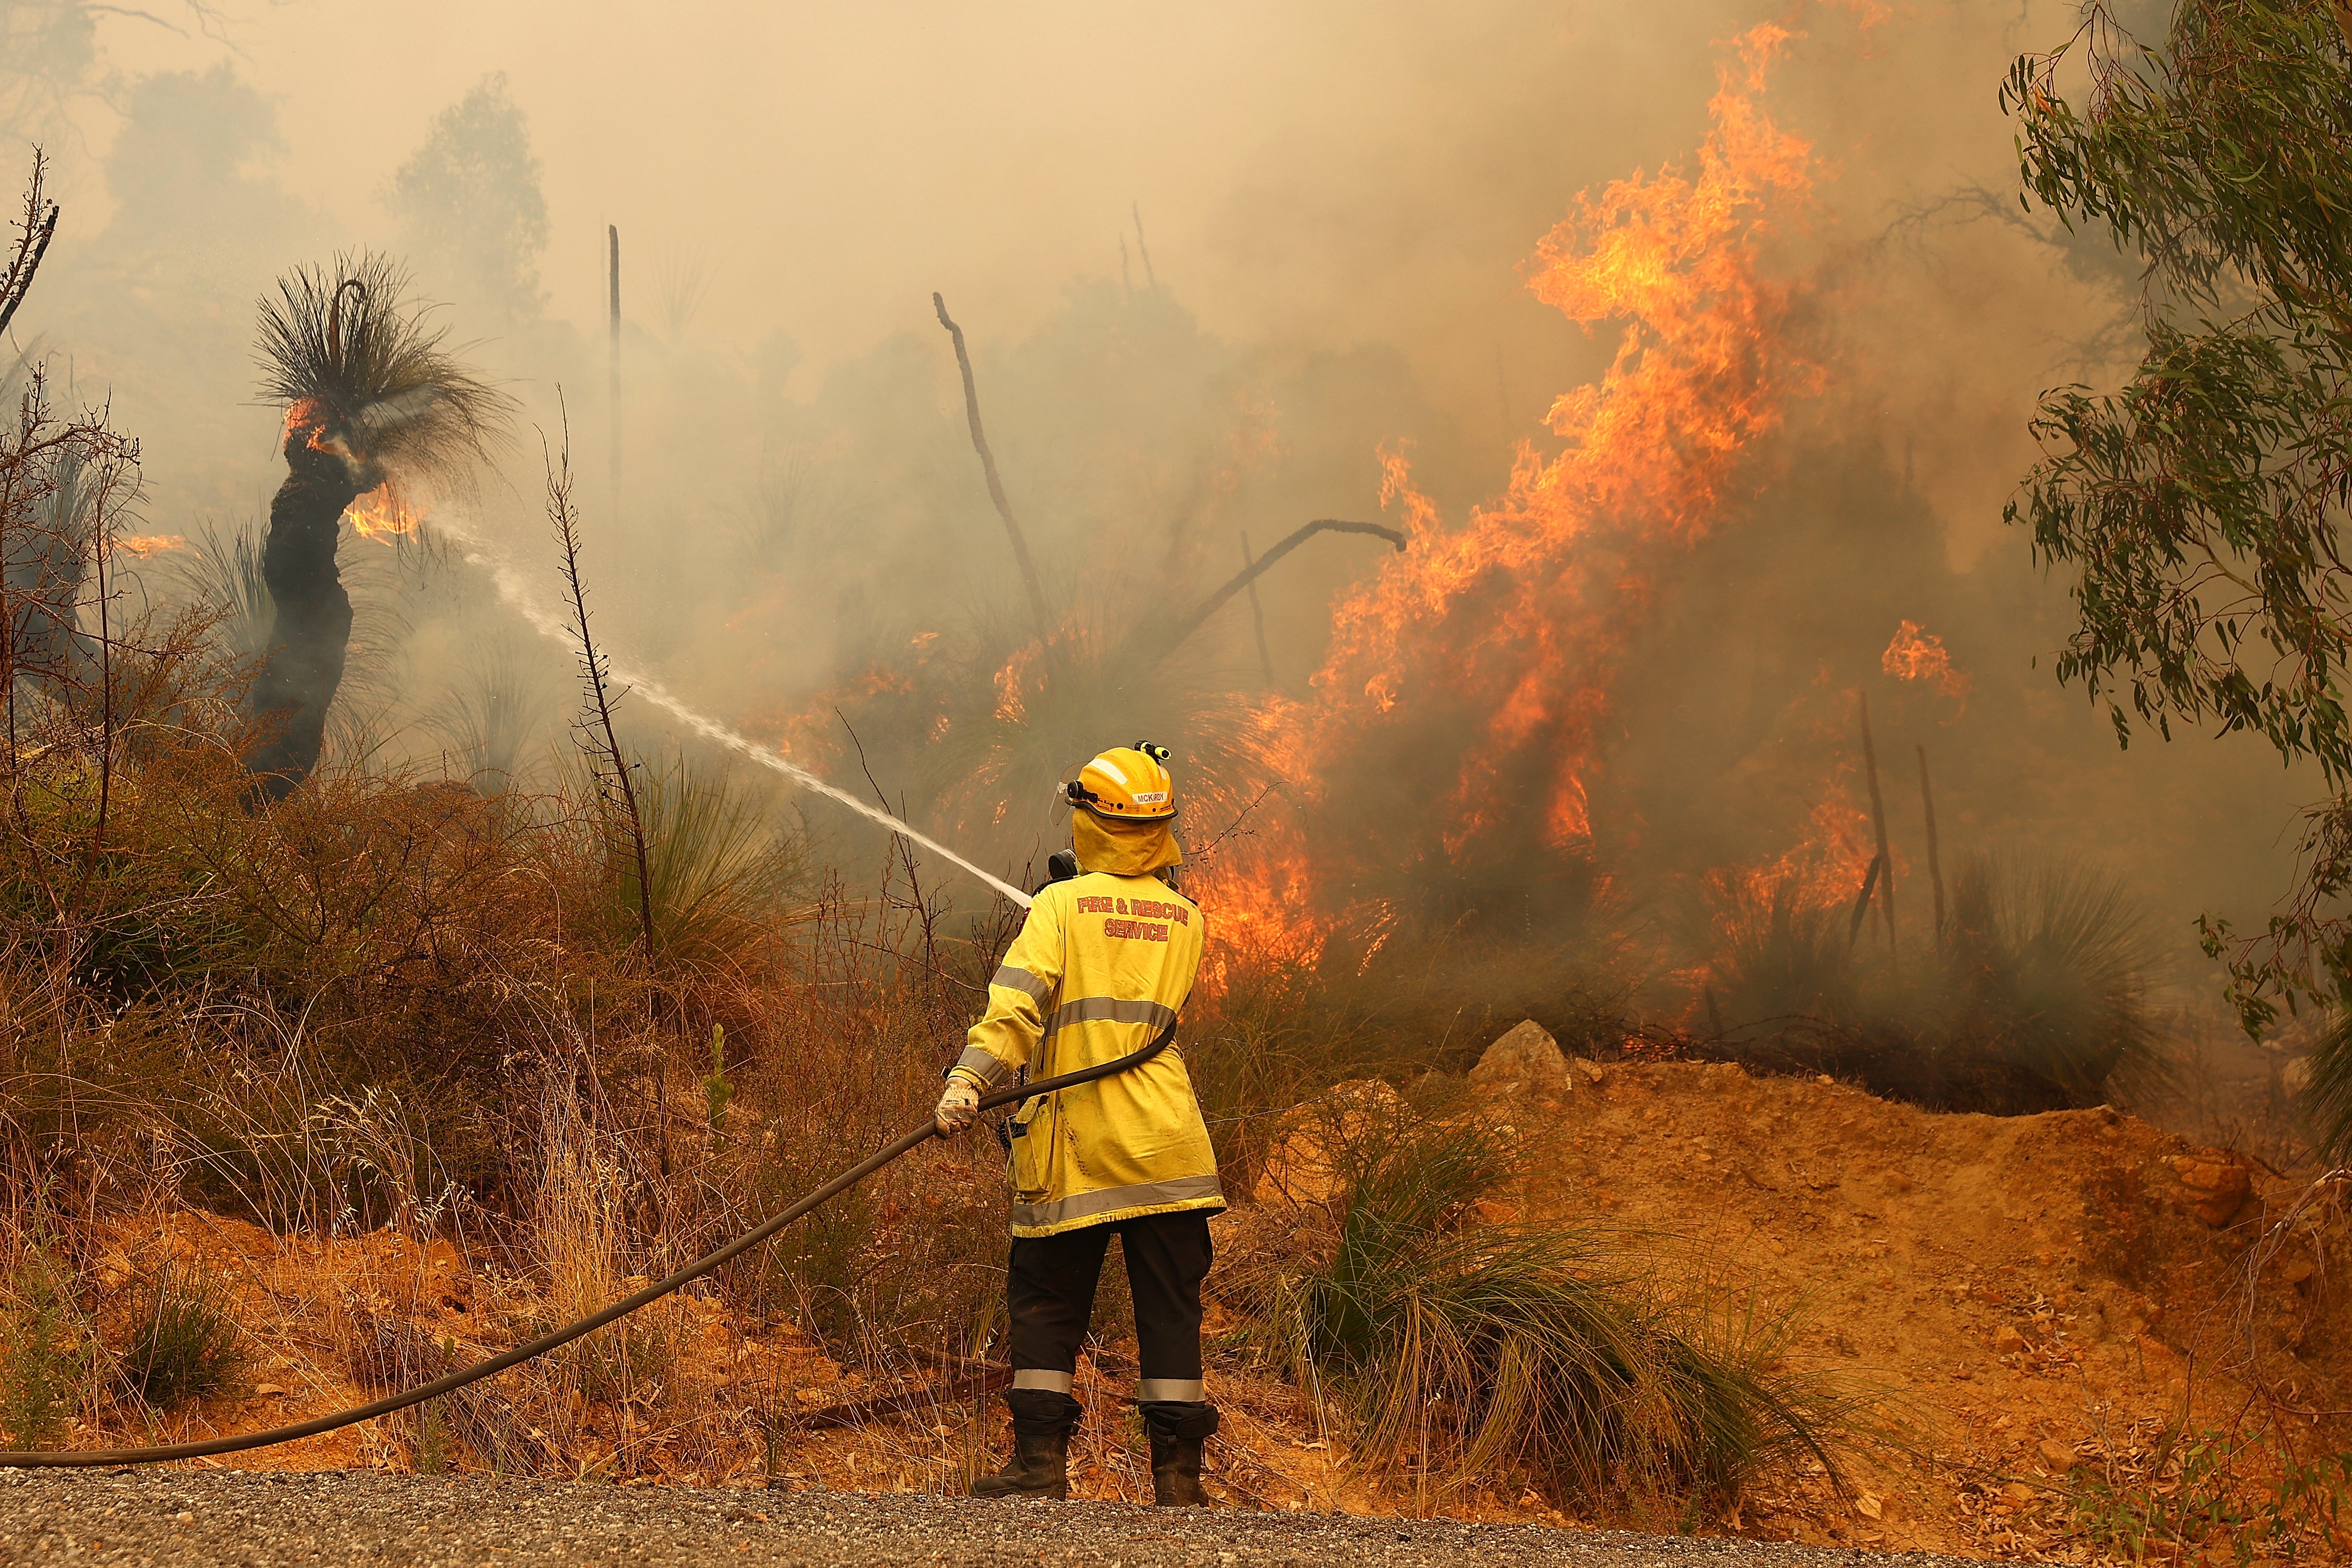 Fire crews control bush fires as they approach properties on Copley Road in Upper Swan on 2 February, 2021 in Perth, Australia